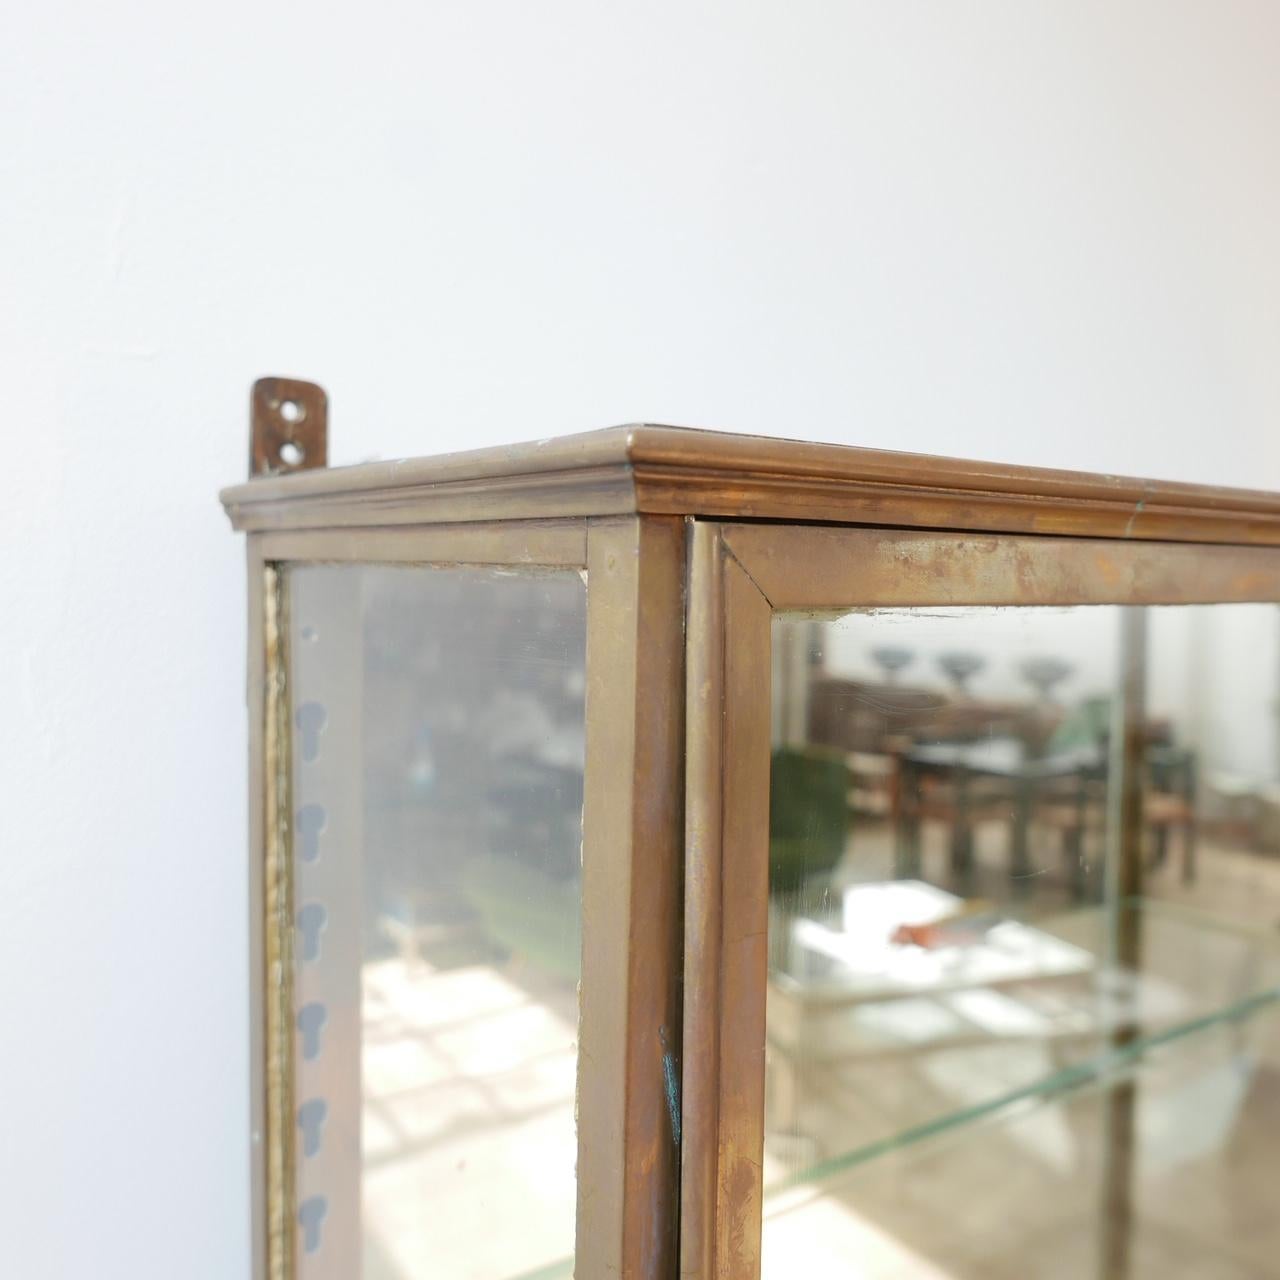 A pair of antique vitrines.

France, early 20th century.

Brass, glass and oak bases.

The bases can be removed.

The shelves are adjustable.

Mirrored back and base.

Price is for the pair. 

Dimensions: 76.5 W x 160.5 H x 20.5 D for